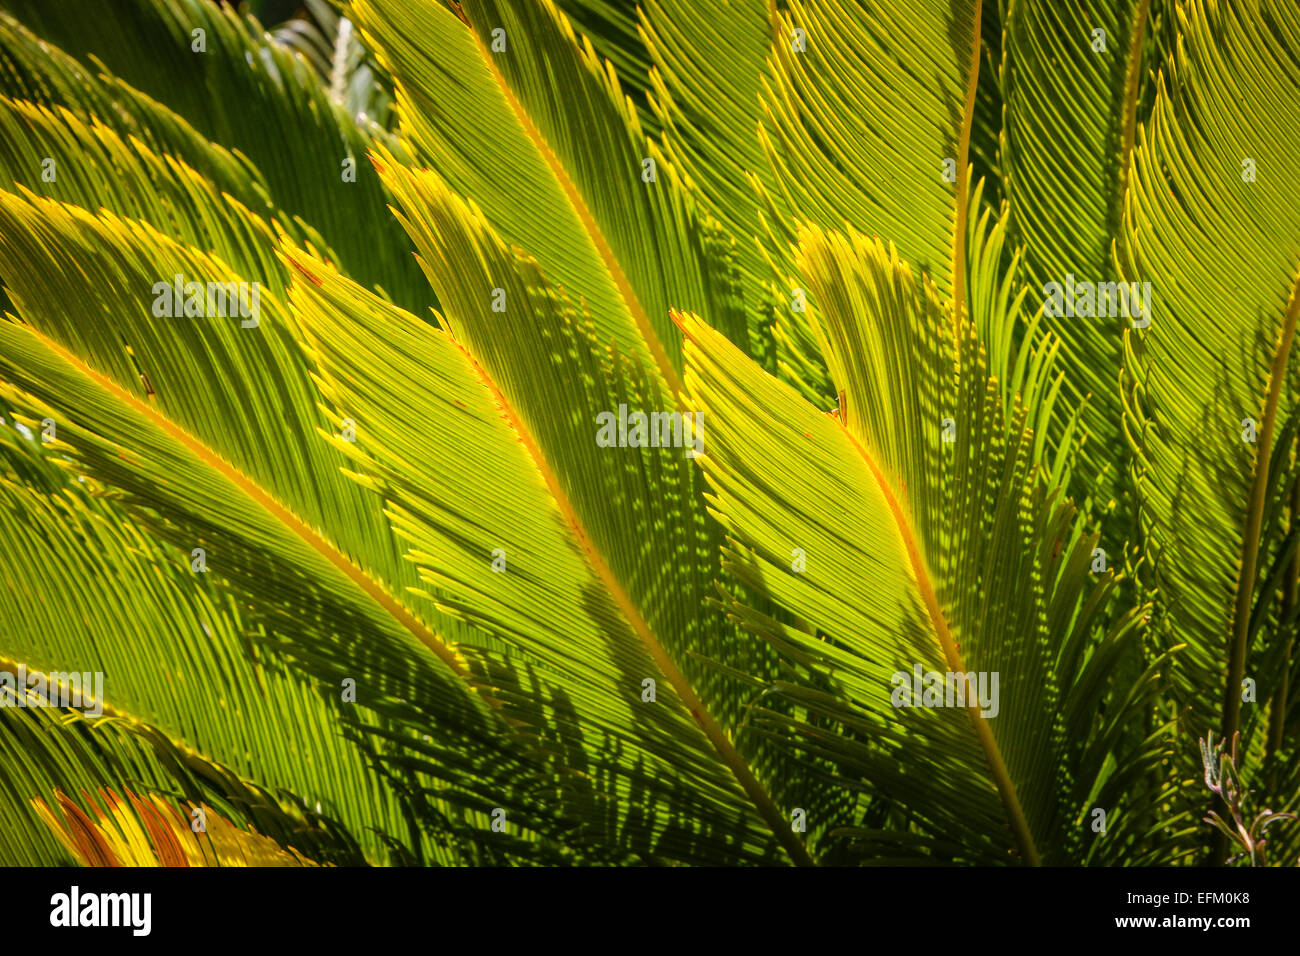 Detail of green sunlit palm leaves Stock Photo